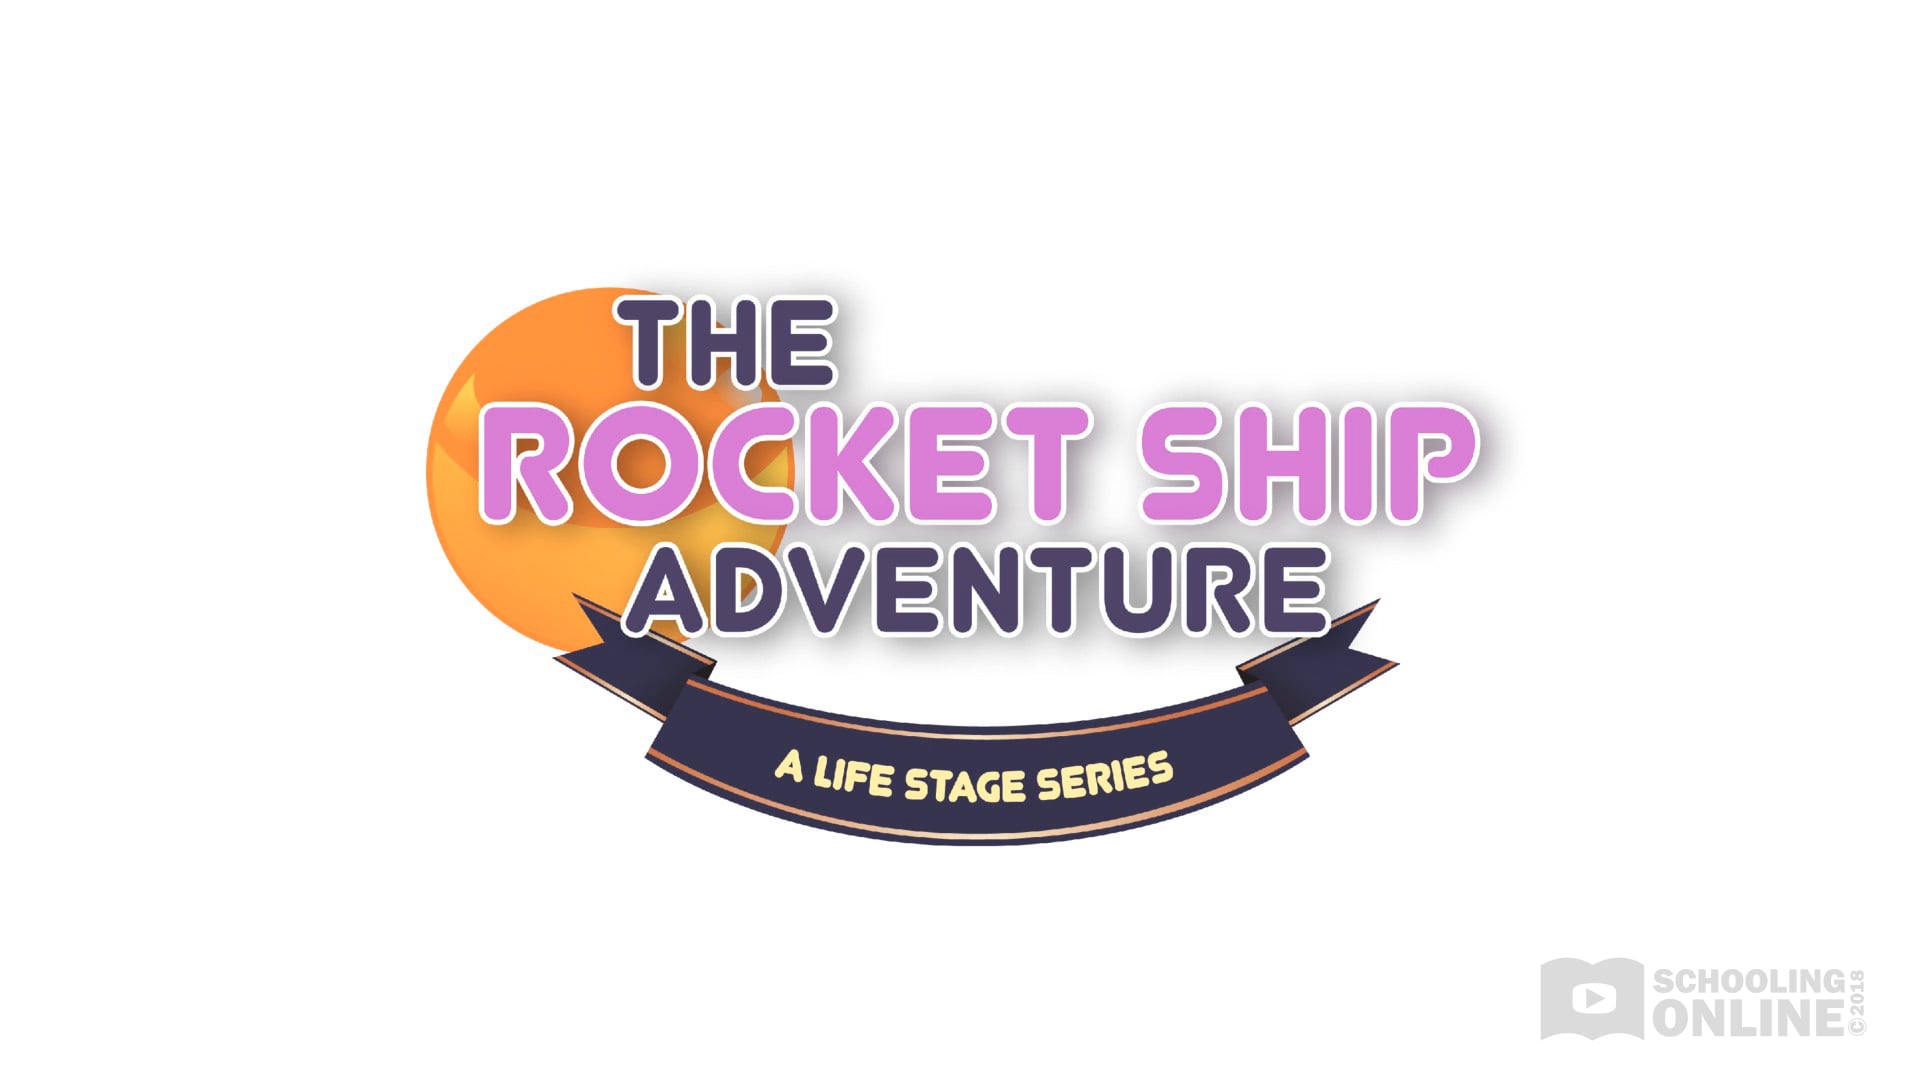 The Rocket Ship Adventure - The Life Stage Series